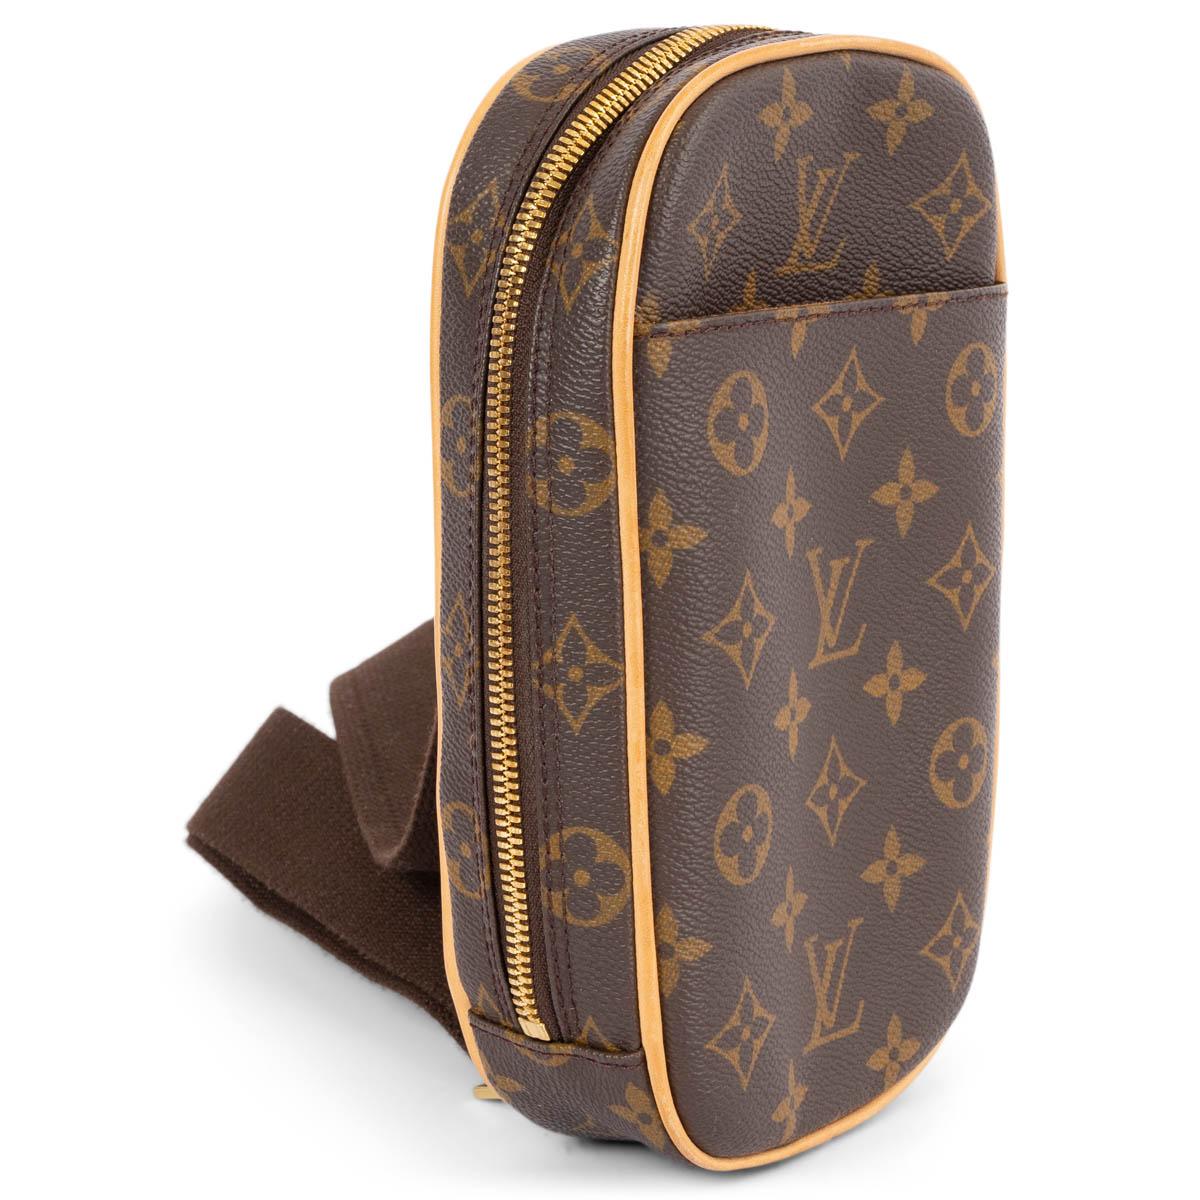 LOUIS VUITTON 100th ANNIVERSARY OF MONOGRAM STAMP COLLECTION